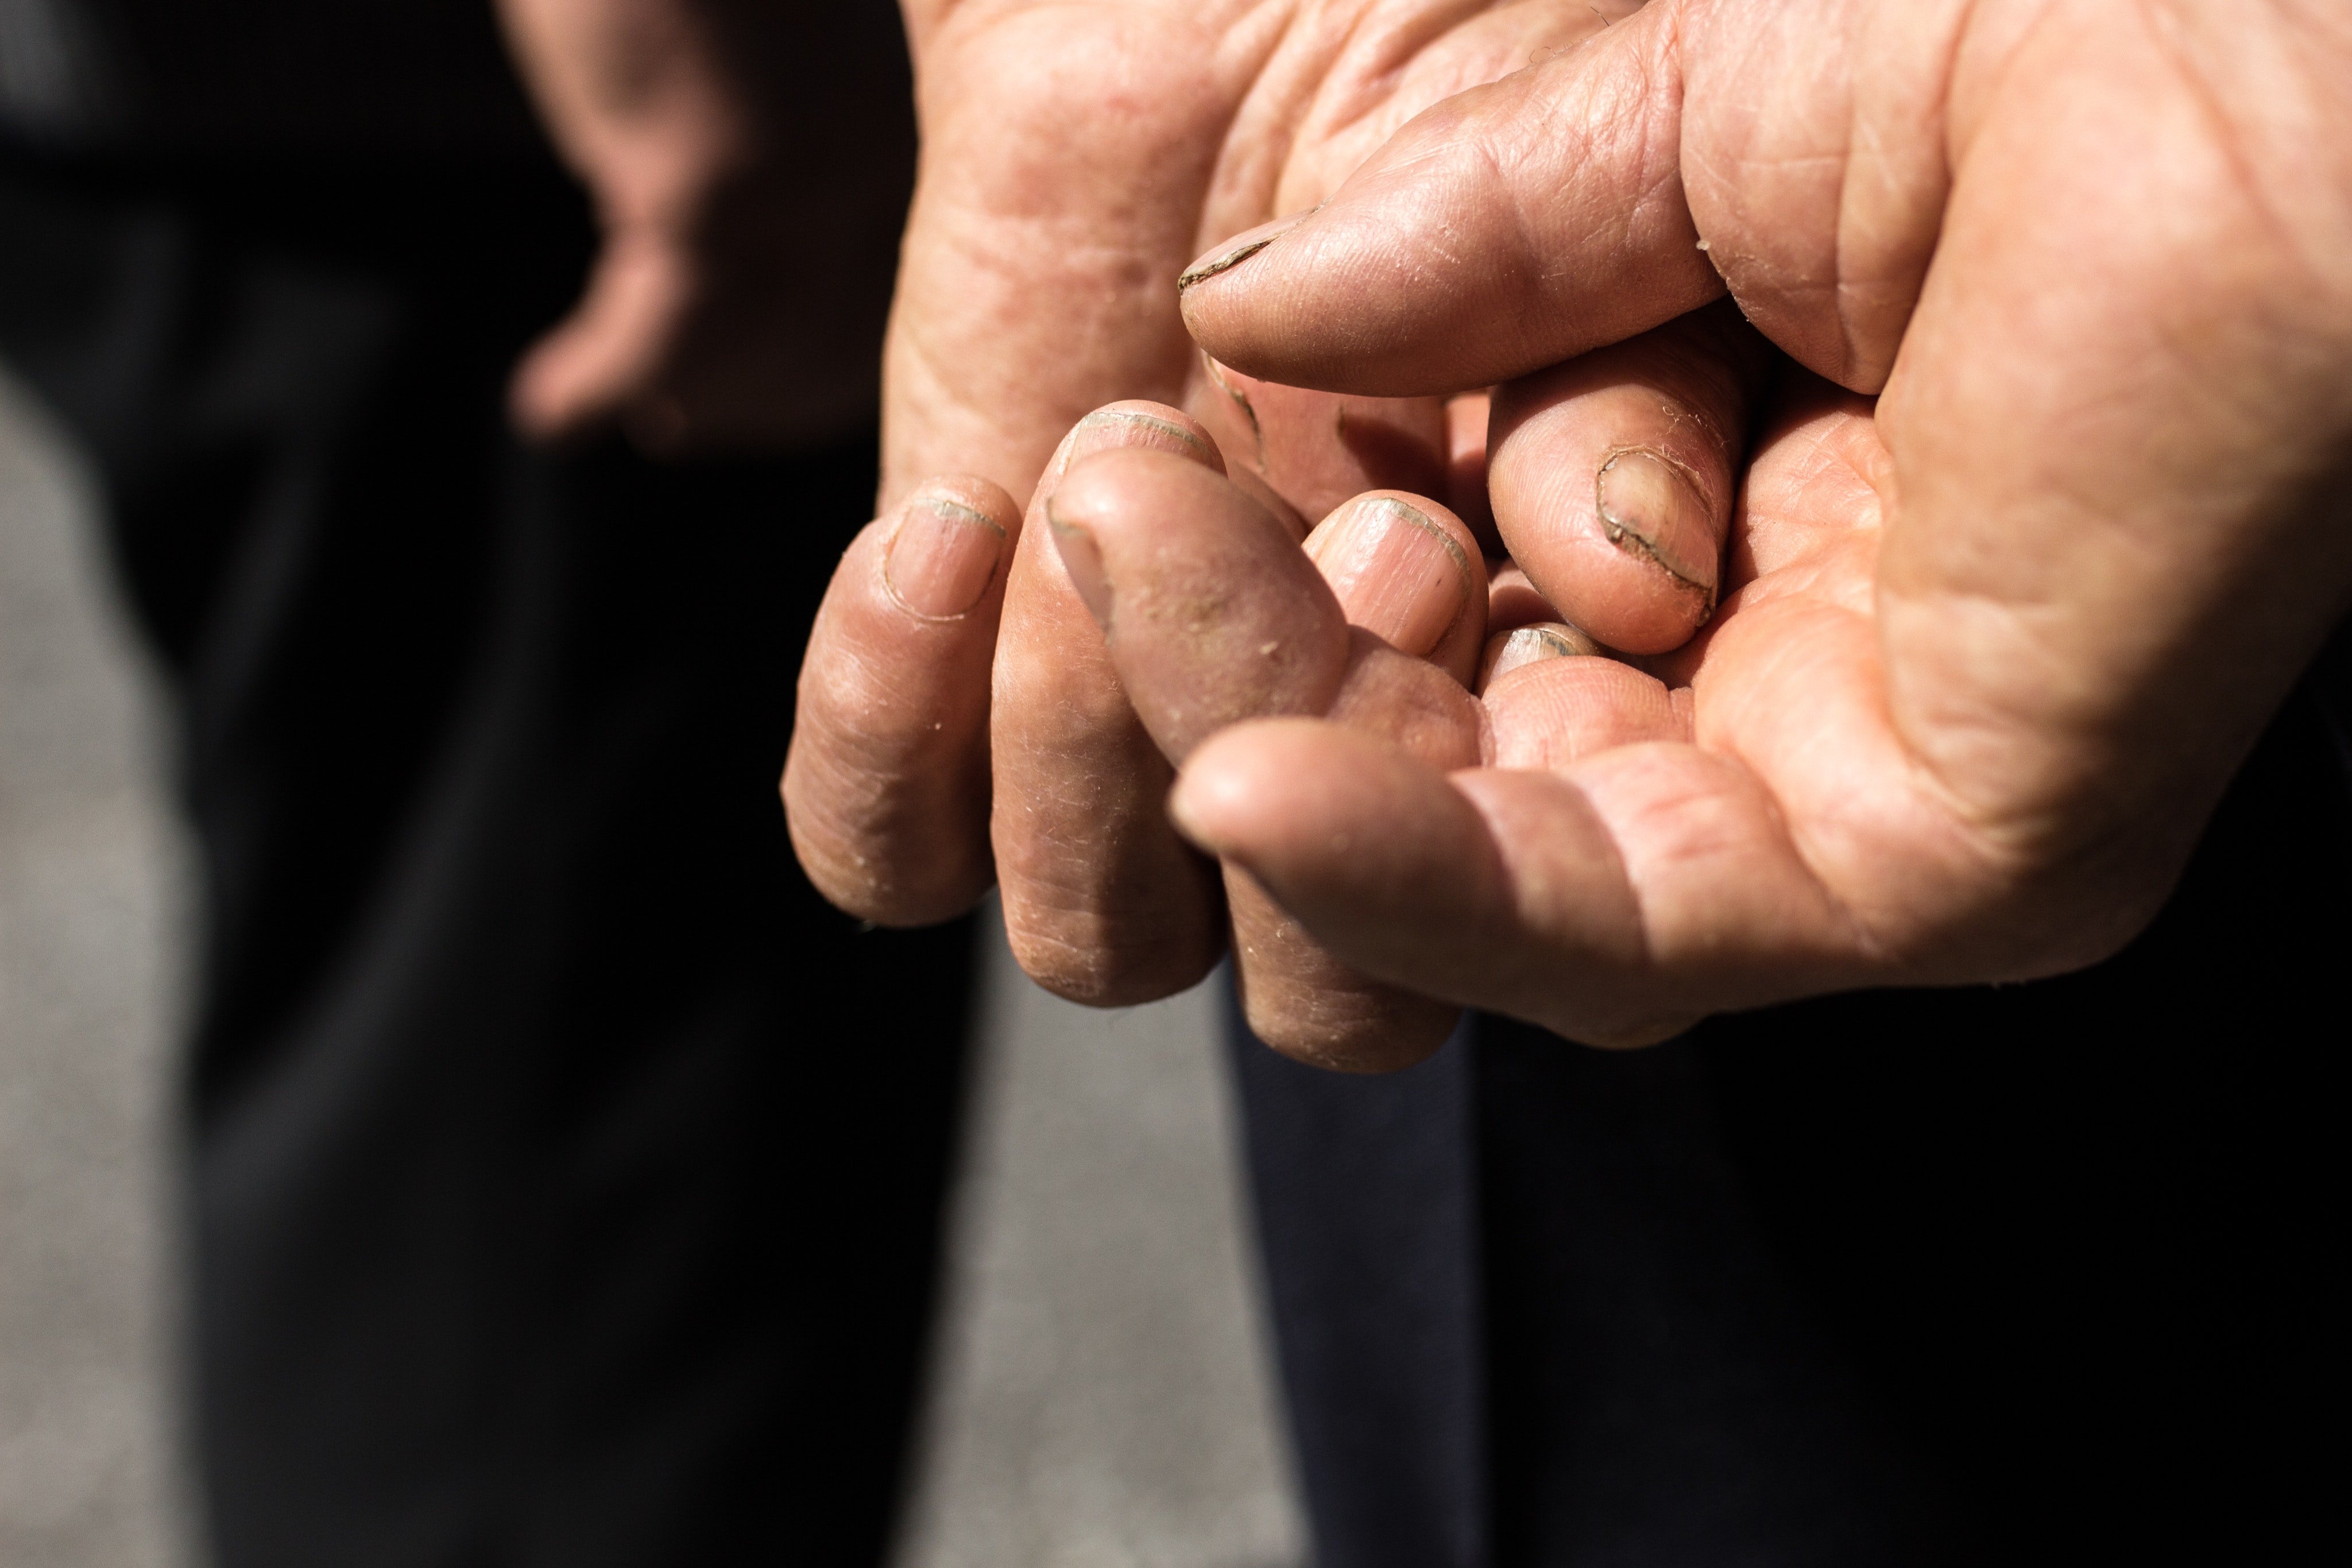 Chuck shook the man's filthy hand. | Source: Pexels